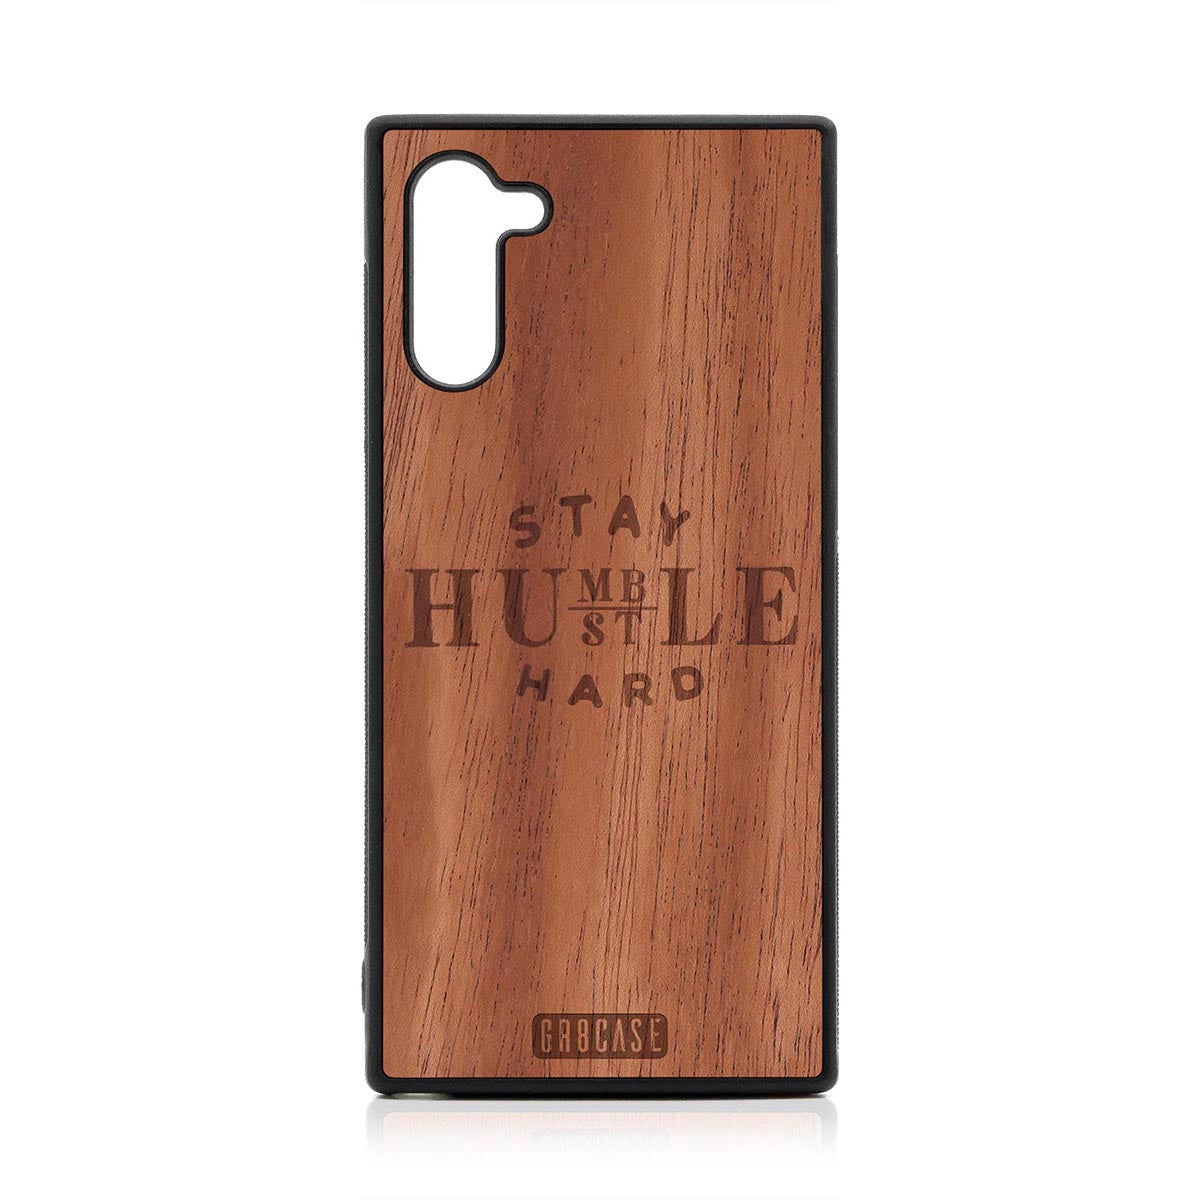 Stay Humble Hustle Hard Design Wood Case Samsung Galaxy Note 10 by GR8CASE